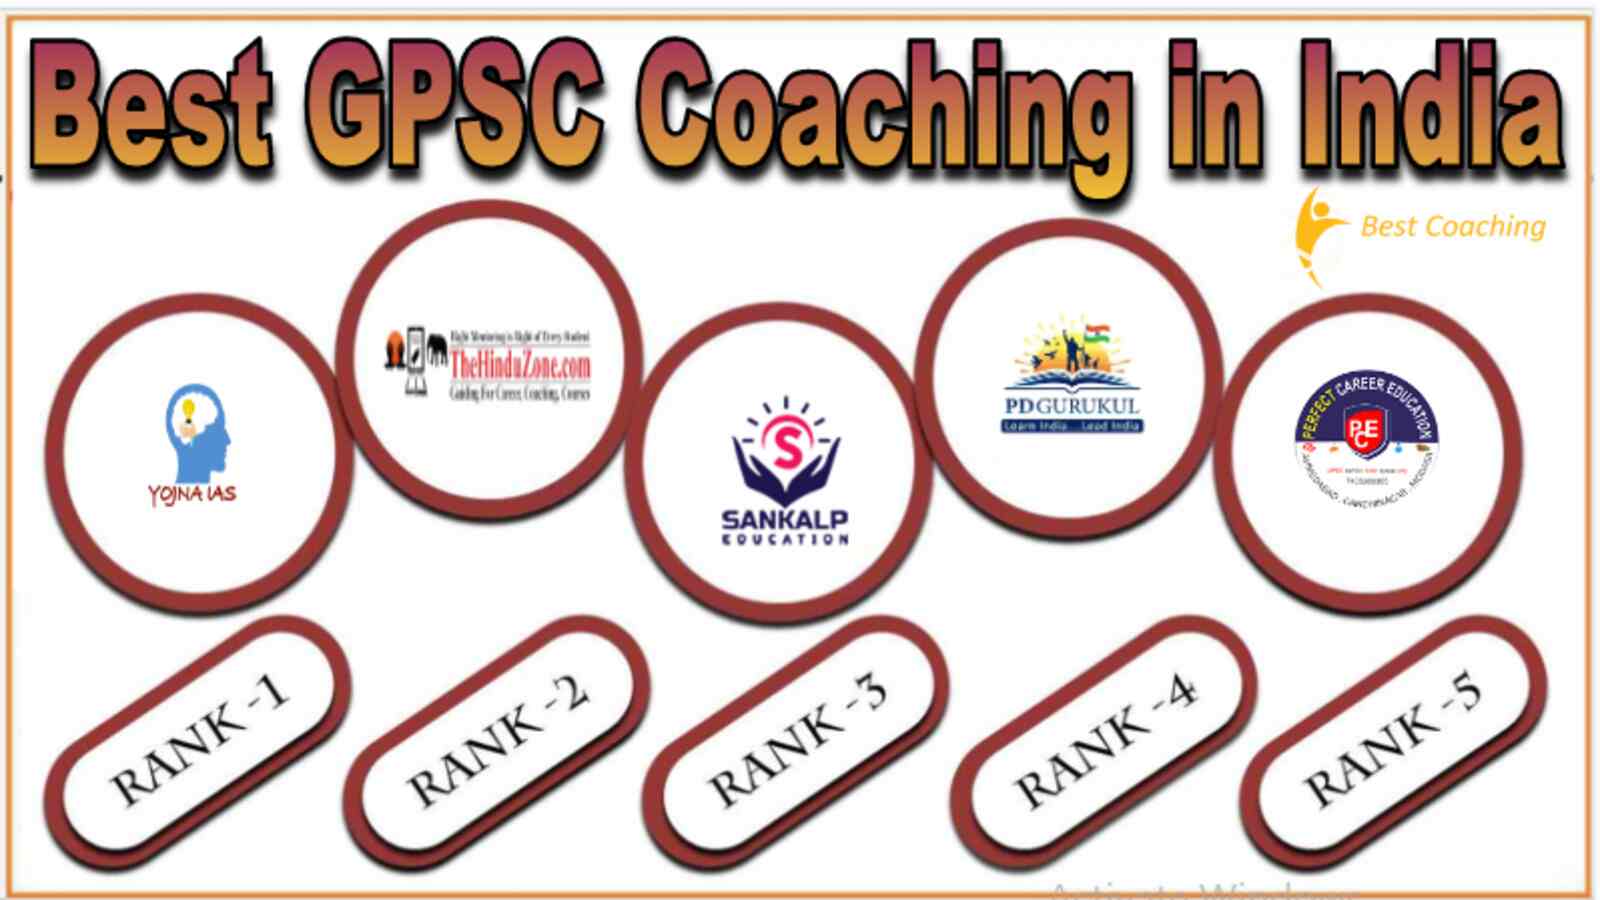 Best GPSC Coaching in India